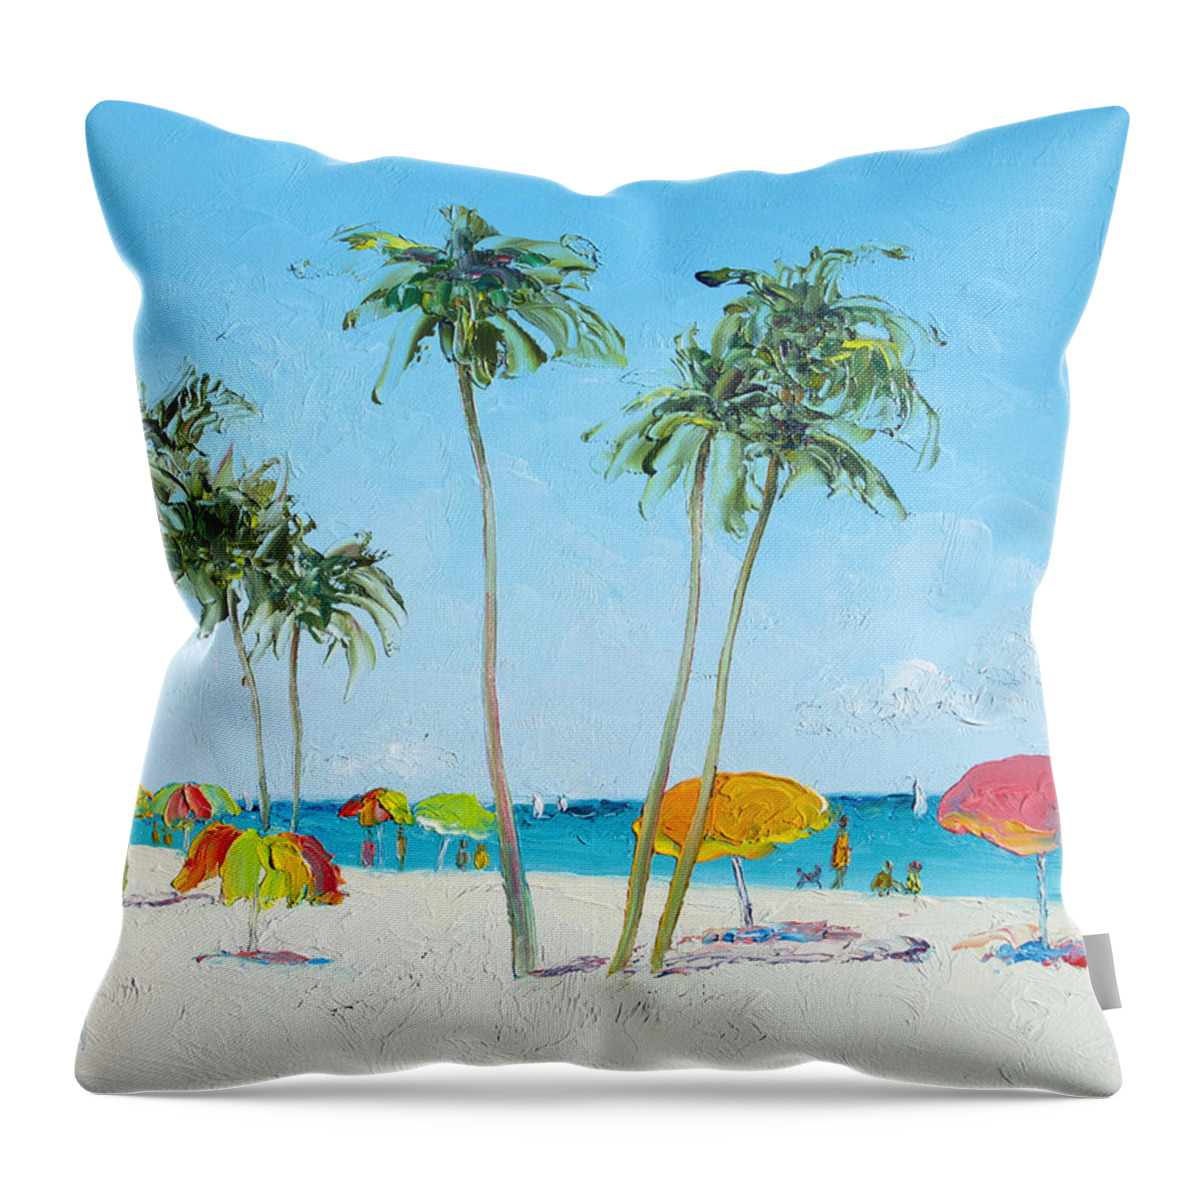 Hollywood Beach Fl Throw Pillow featuring the painting Hollywood Beach Florida and Coconut Palms by Jan Matson